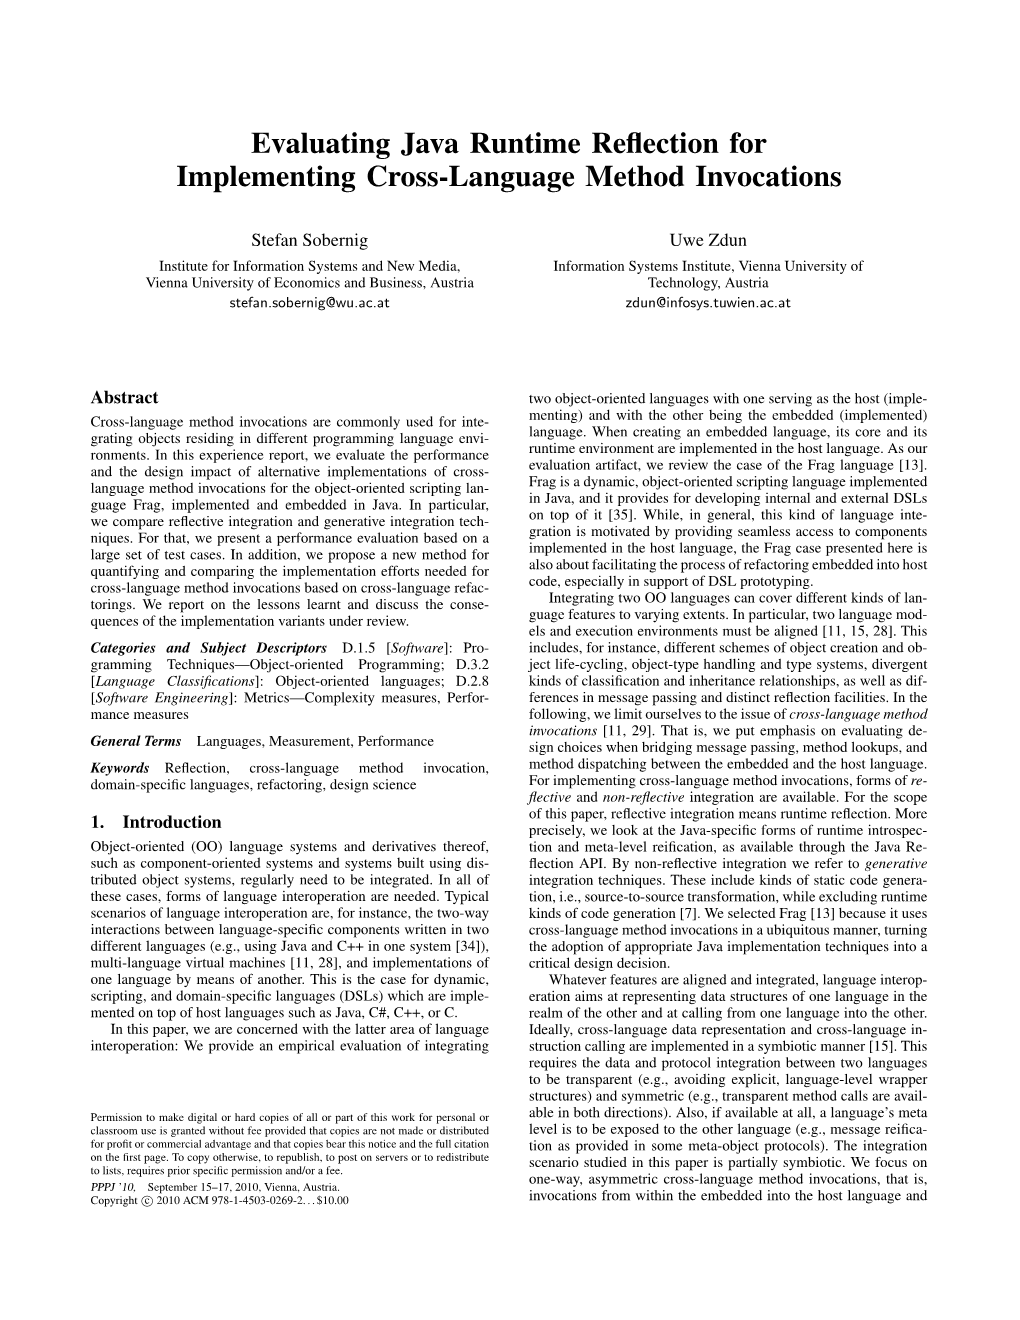 Evaluating Java Runtime Reflection for Implementing Cross-Language Method Invocations